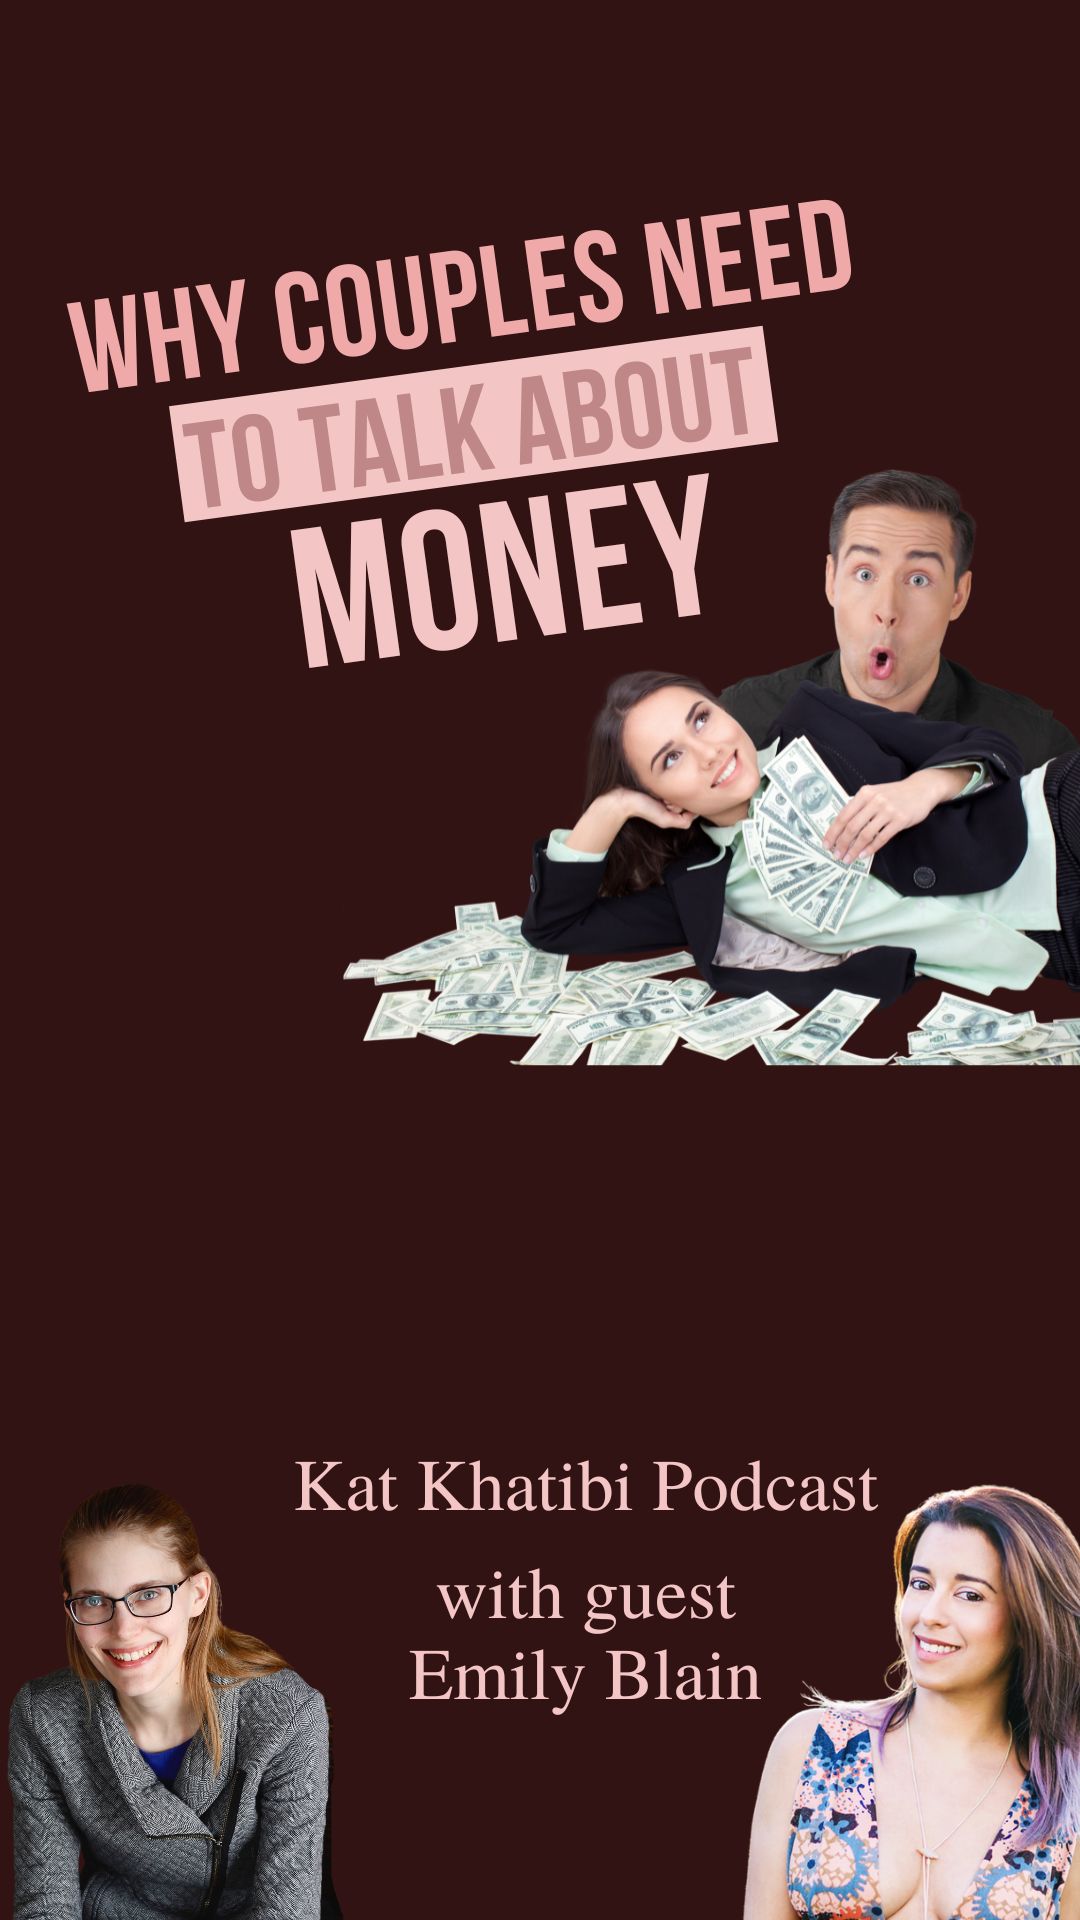 Why Couples Need to Talk About Money Before Marriage, with Emily Blain Premarital Financial Coach